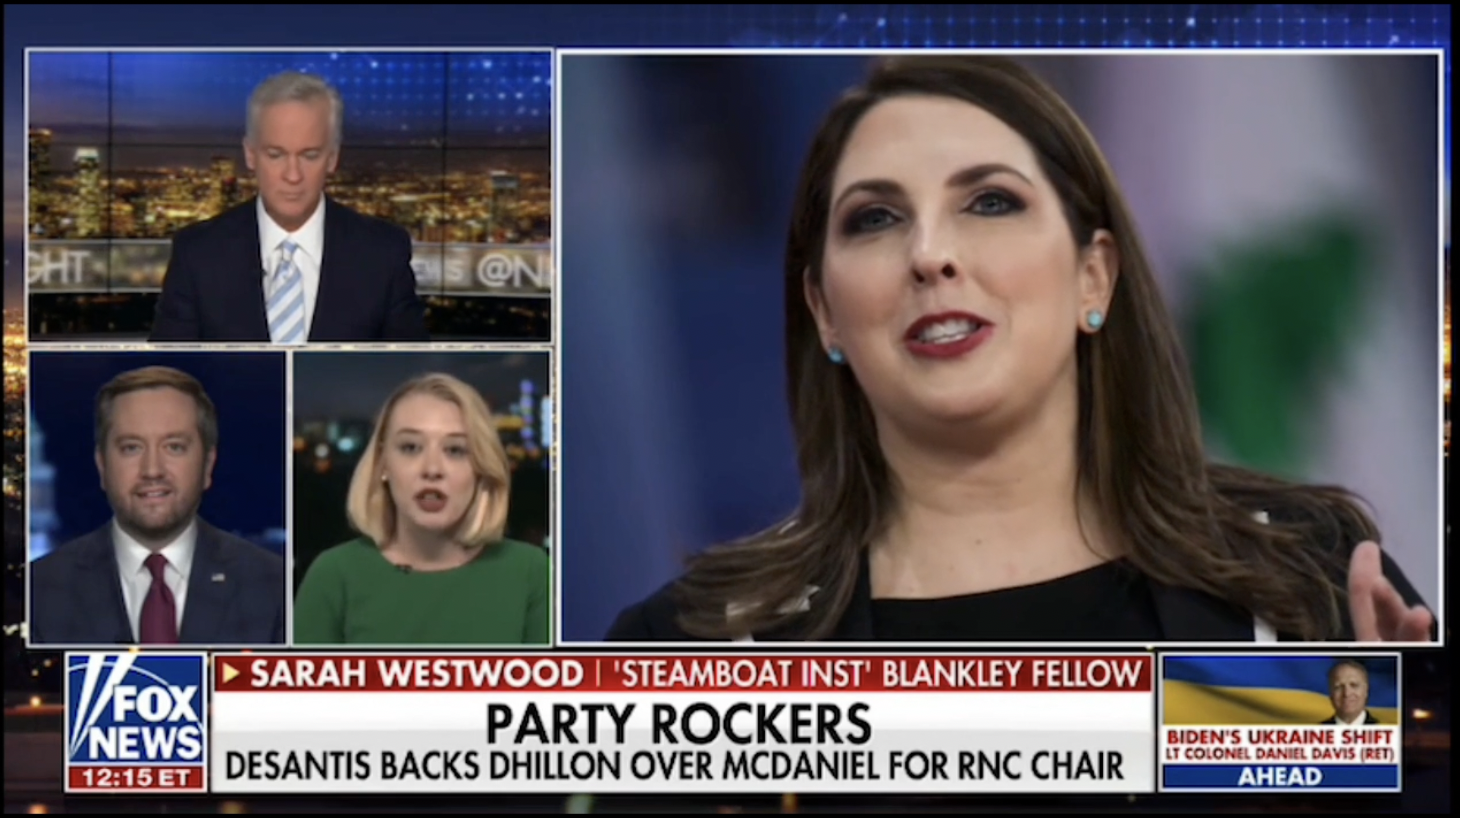 Blankley Fellow Sarah Westwood Appears on Fox News Live to Discuss